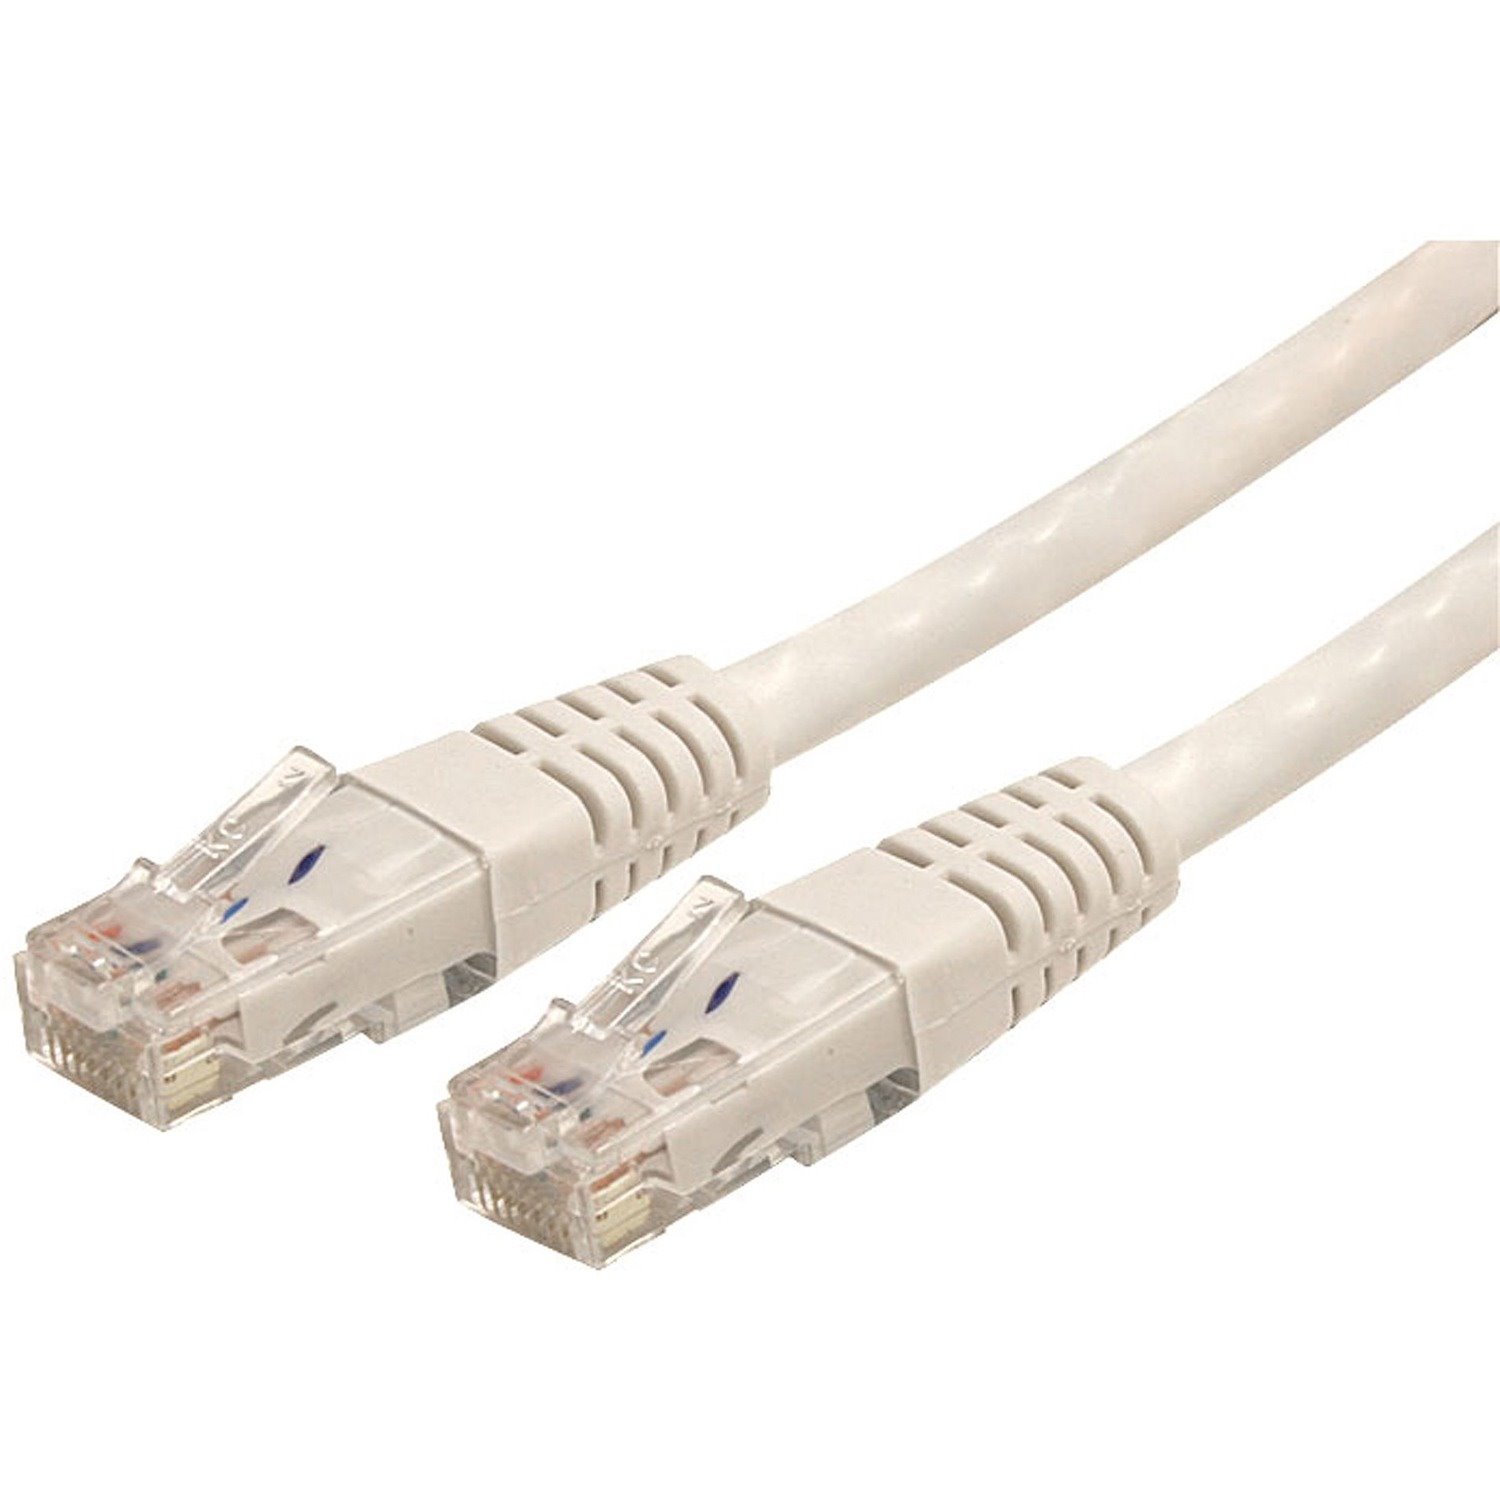 StarTech.com 8ft CAT6 Ethernet Cable - White Molded Gigabit - 100W PoE UTP 650MHz - Category 6 Patch Cord UL Certified Wiring/TIA